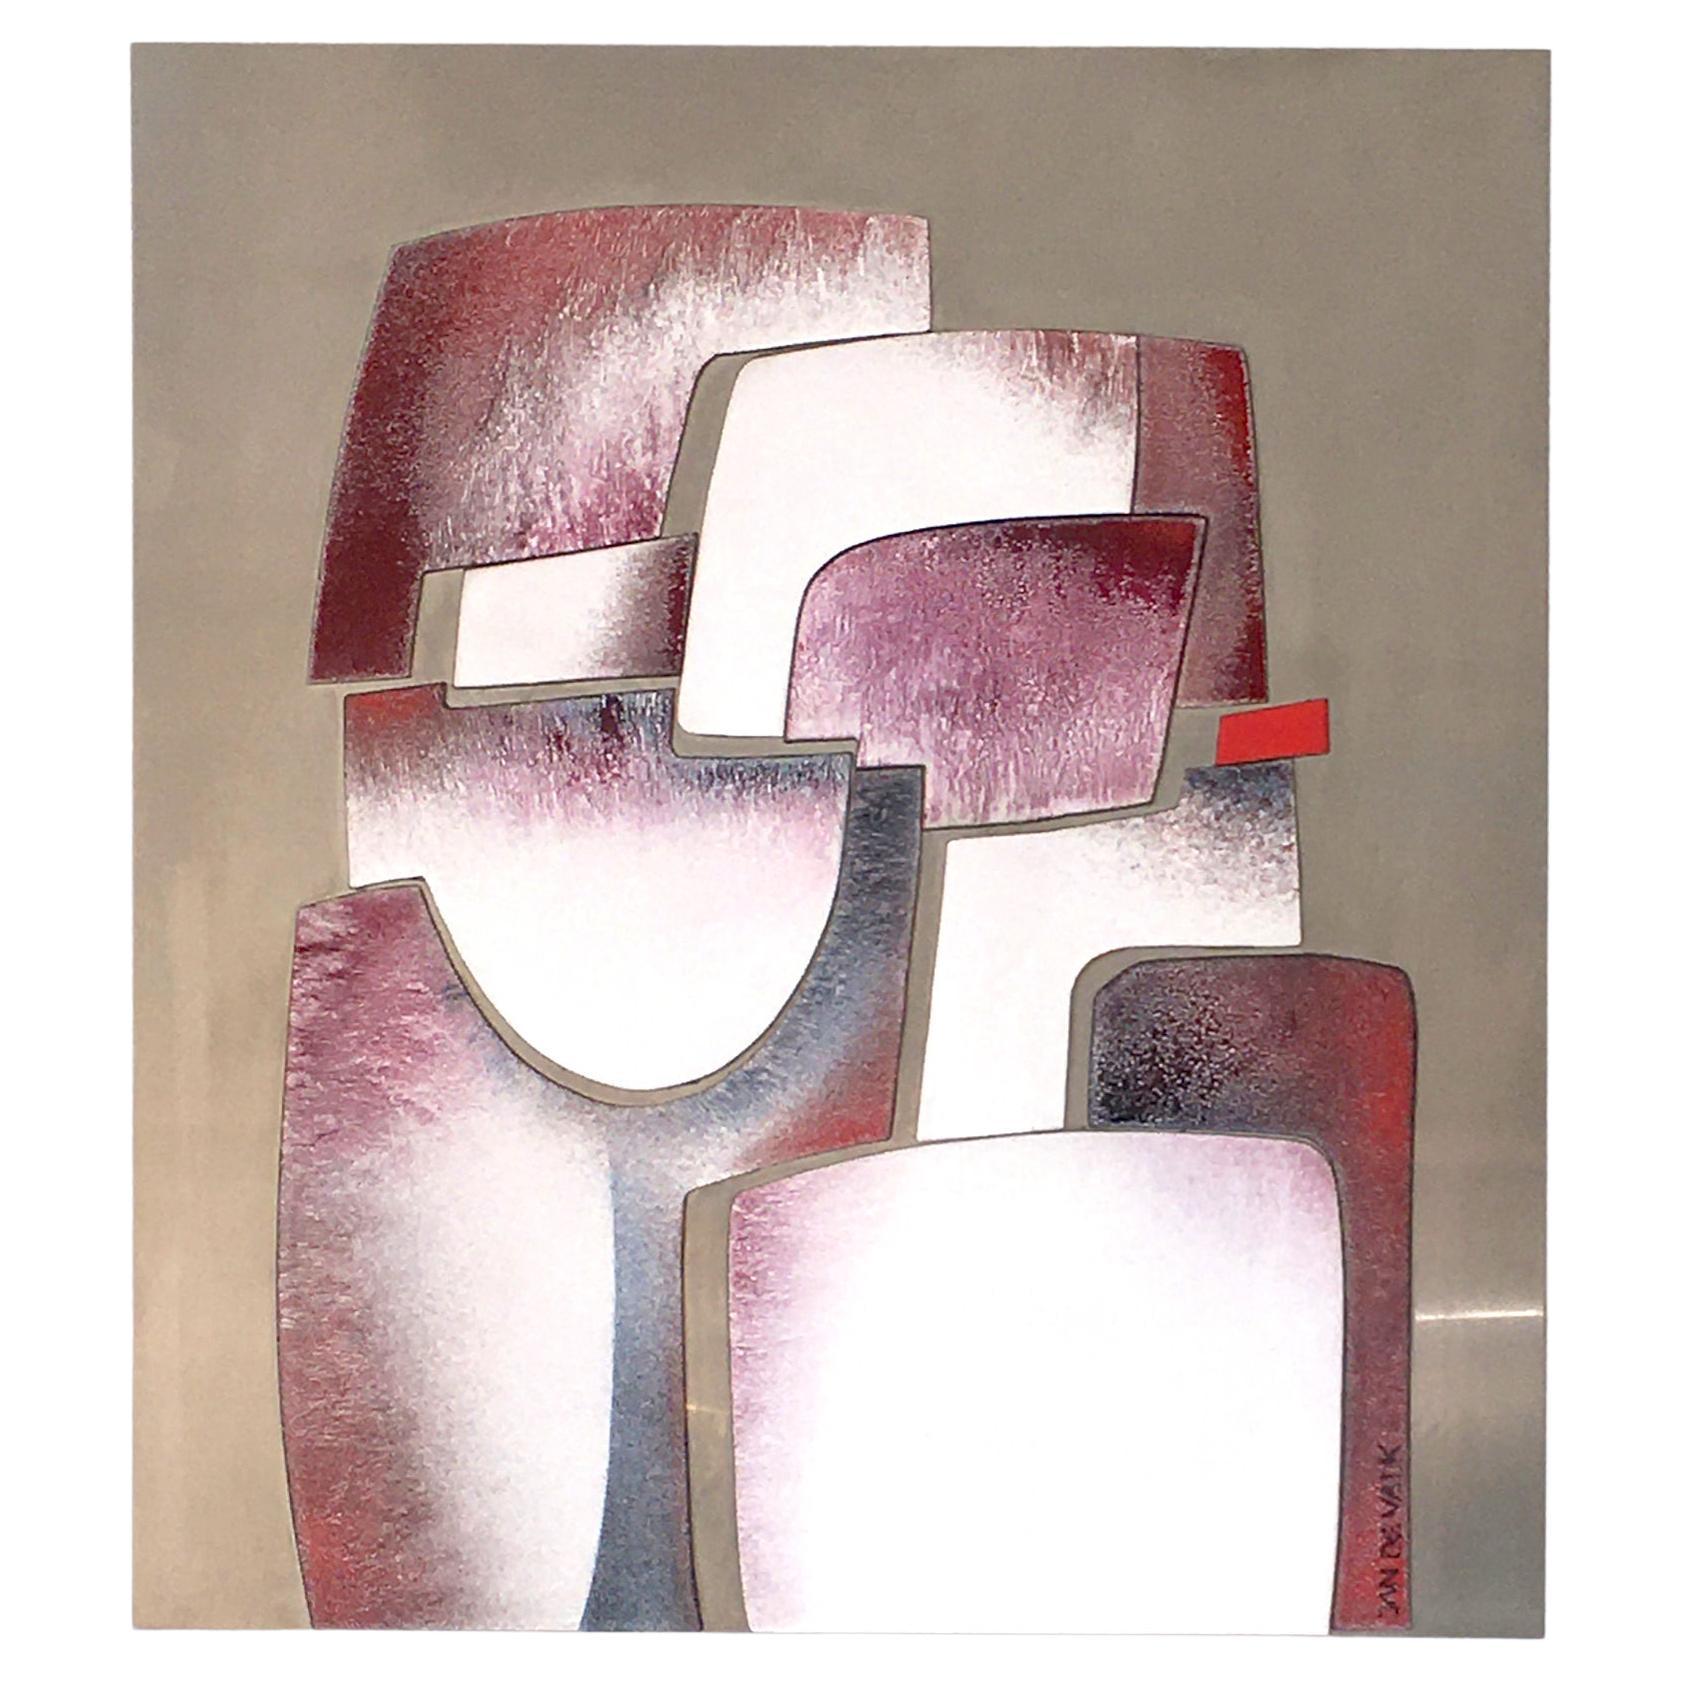 Brutalist Abstract Enamel Wall Artwork in Red Tones, 1980s